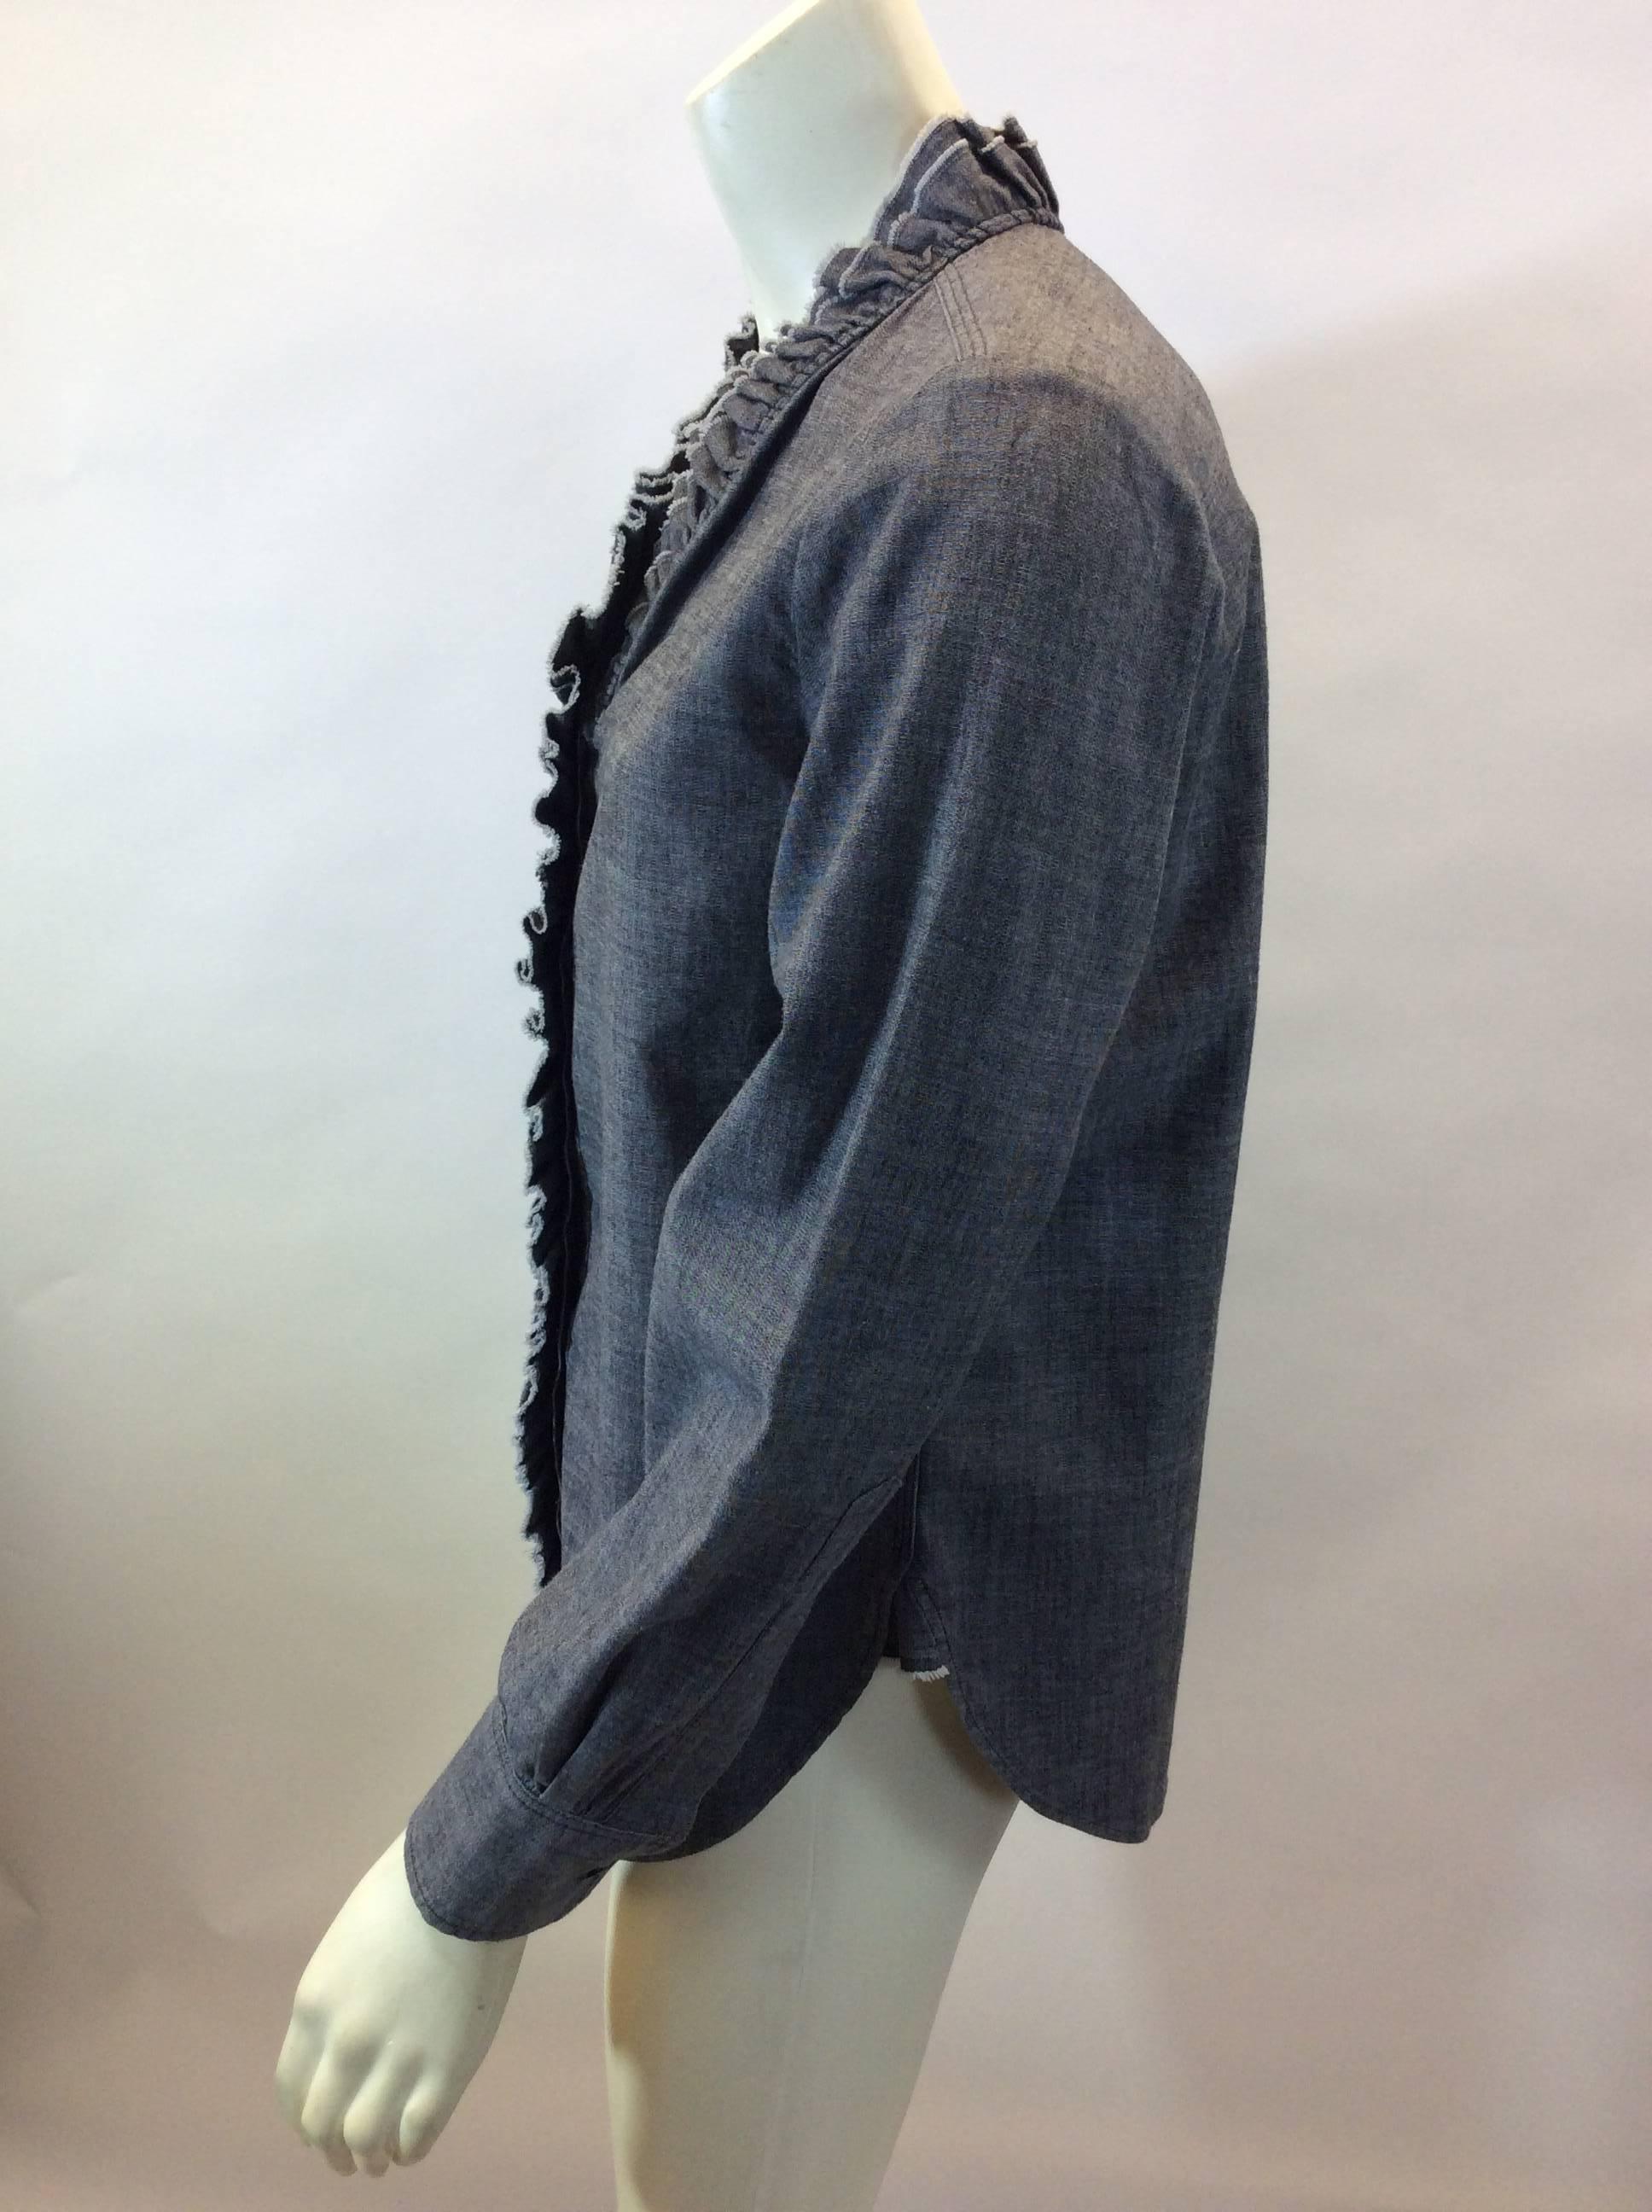 Isabel Marant Grey Button Down Blouse
Made in Tunisia
$138
98% Cotton
2$ Elastane
Size 38
Length 24